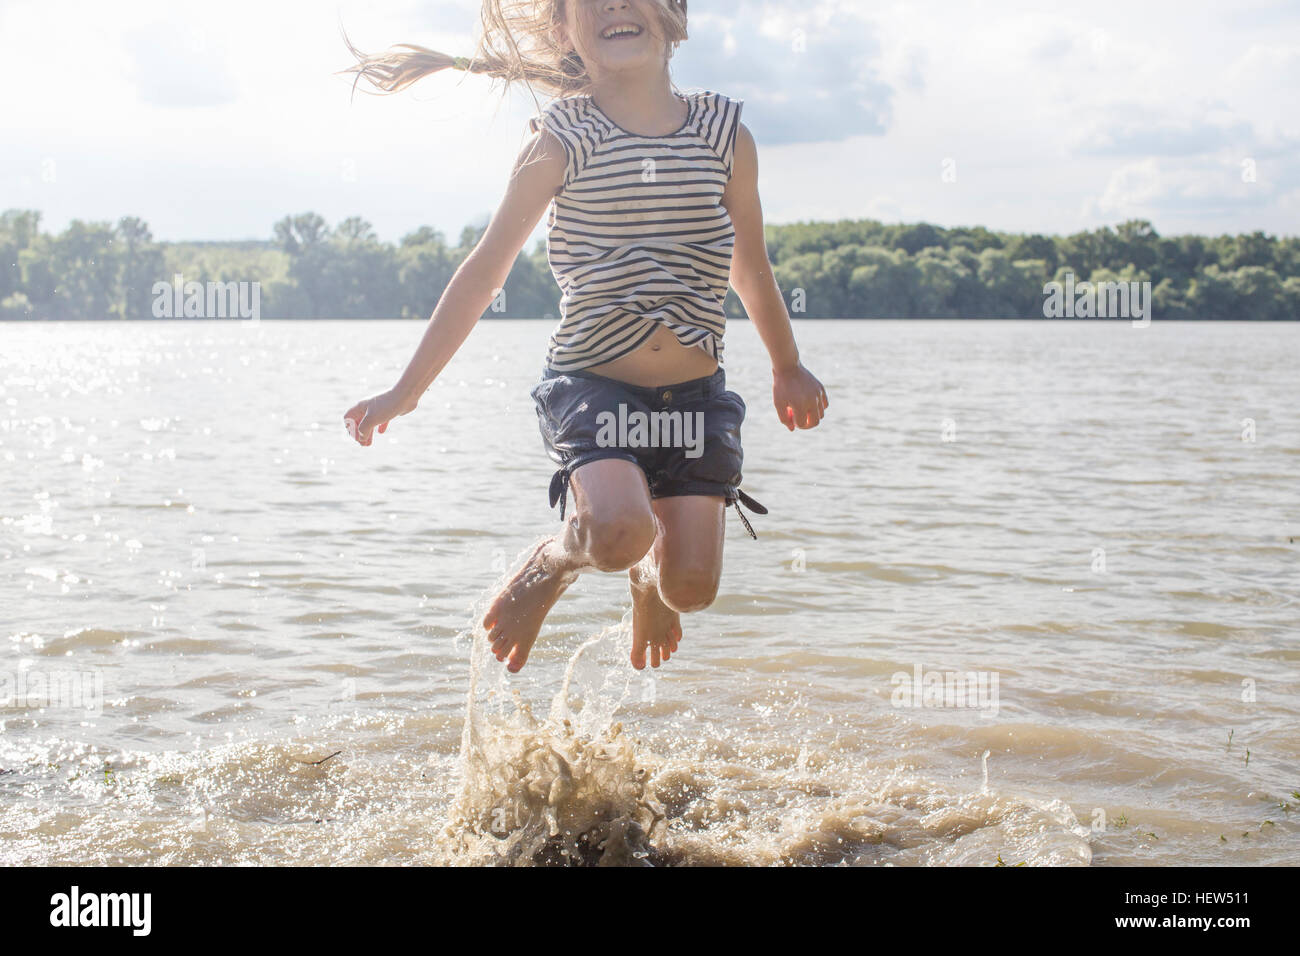 Girl jumping and splashing in river Stock Photo